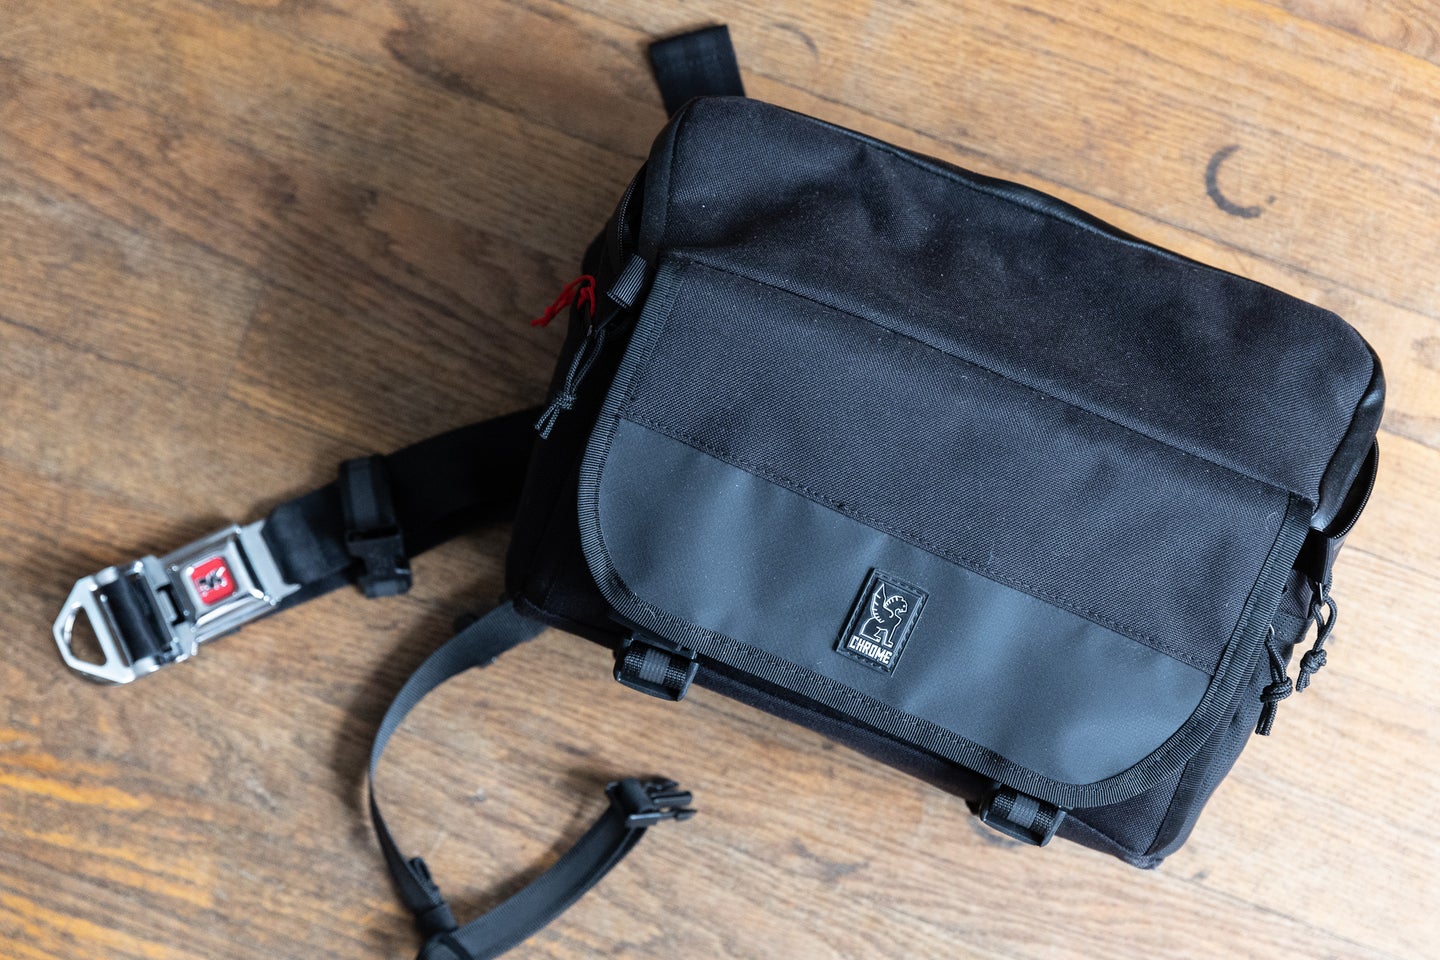 Chrome Niko 3.0 camera sling bag review: Bag laying on the floor